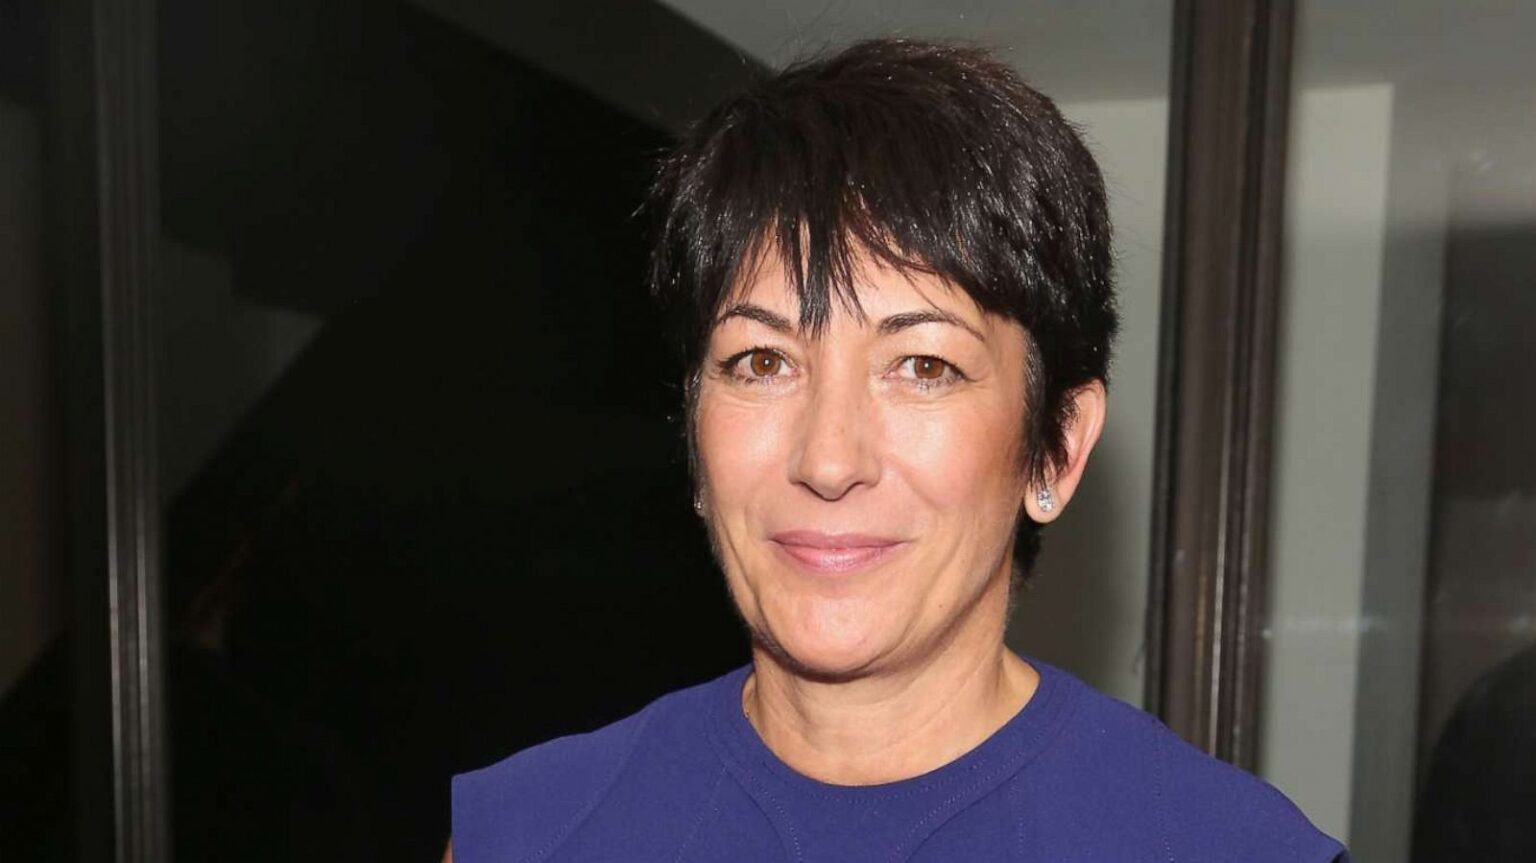 Ghislaine Maxwell news has been heating up recently. Now, it looks like Maxwell was married. Check out the recent news here.